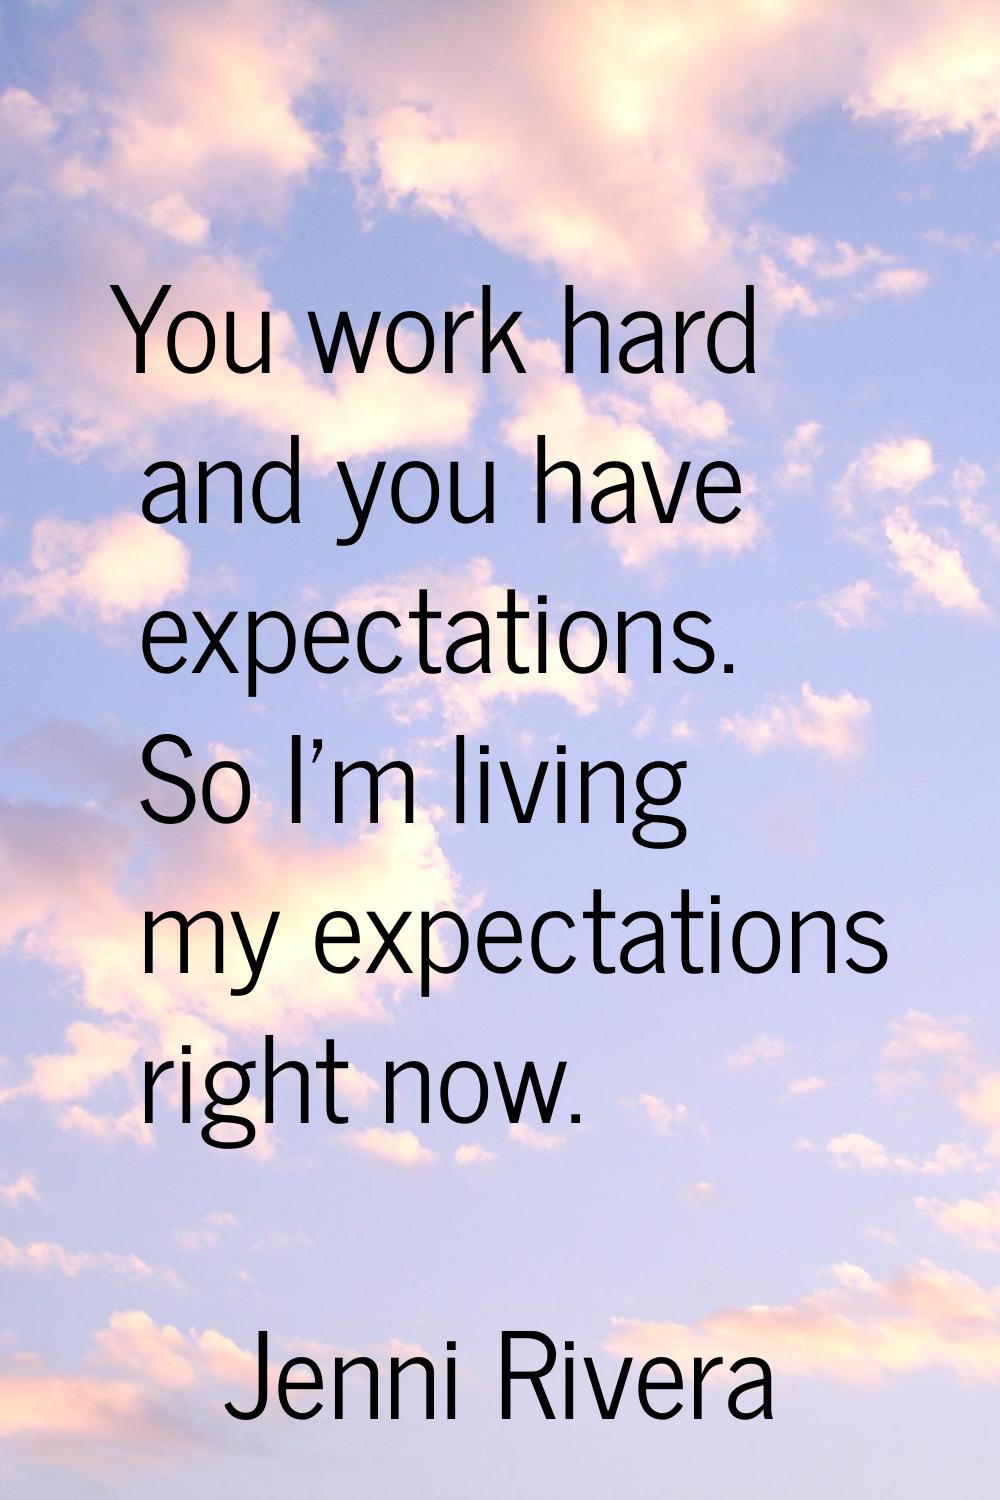 You work hard and you have expectations. So I'm living my expectations right now.